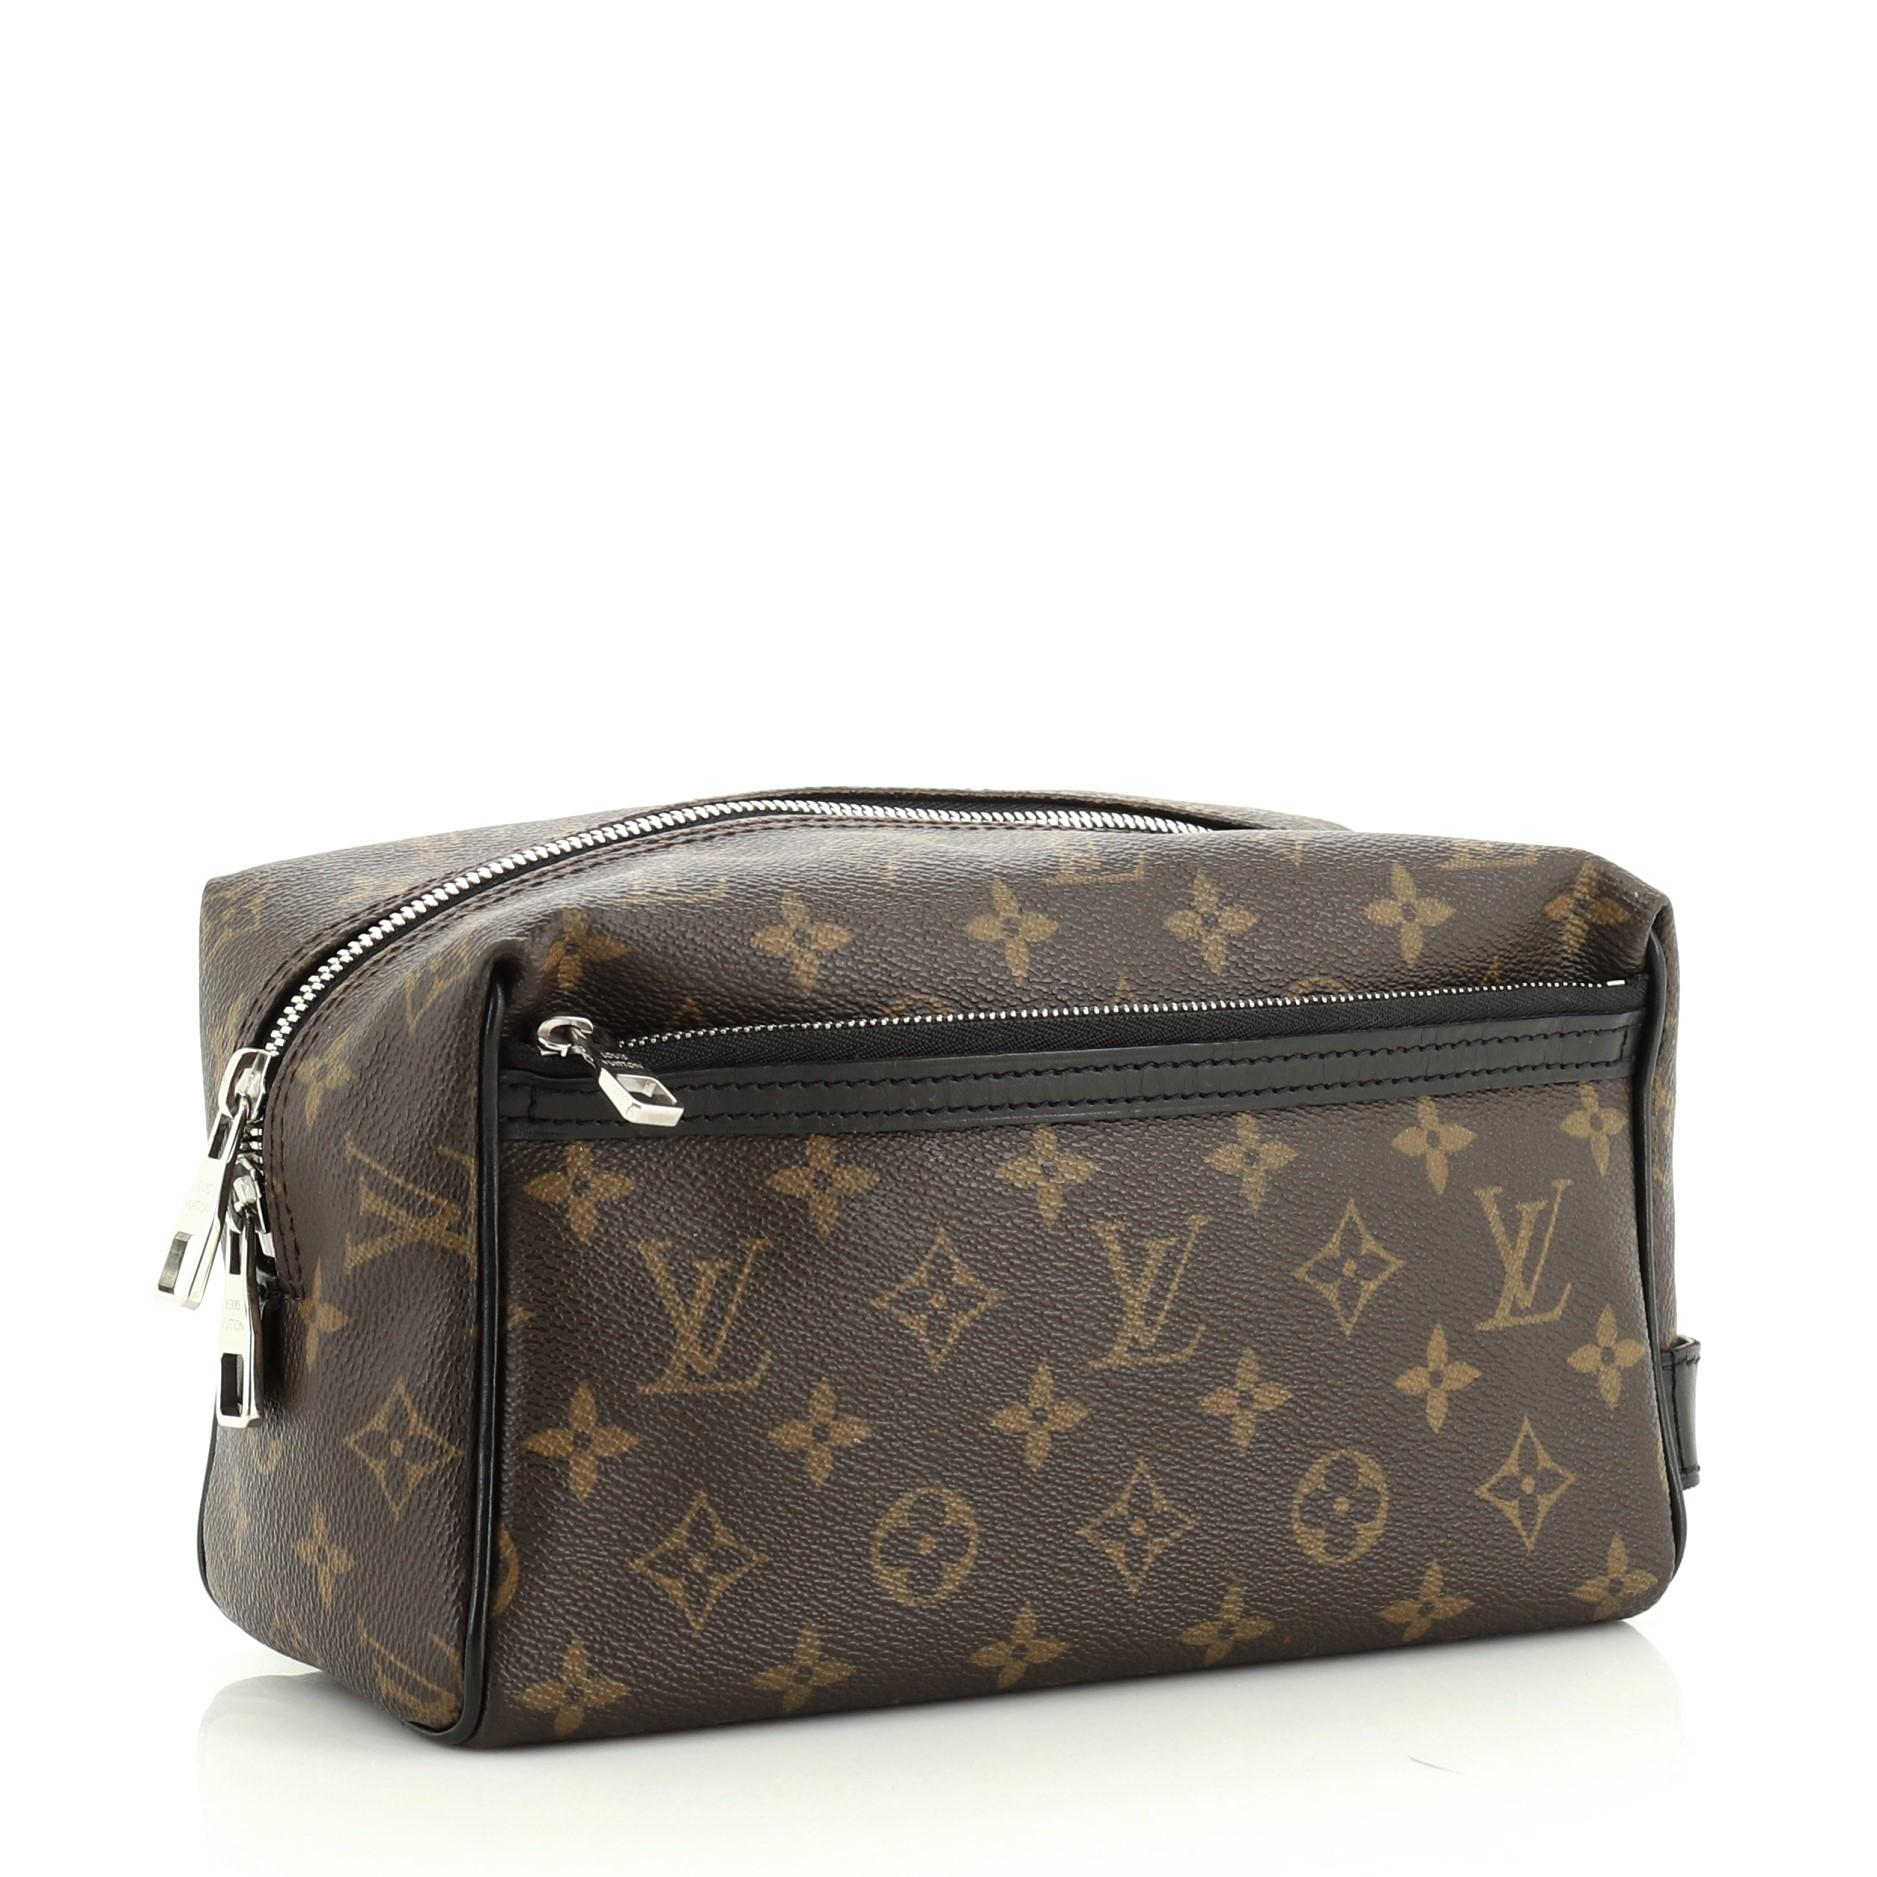 This Louis Vuitton Toiletry Kit Bag Macassar Monogram Canvas, crafted from brown monogram coated canvas, features exterior zip pocket and silver-tone hardware. Its zip closure opens to a purple leather interior. Authenticity code reads: BA1130.